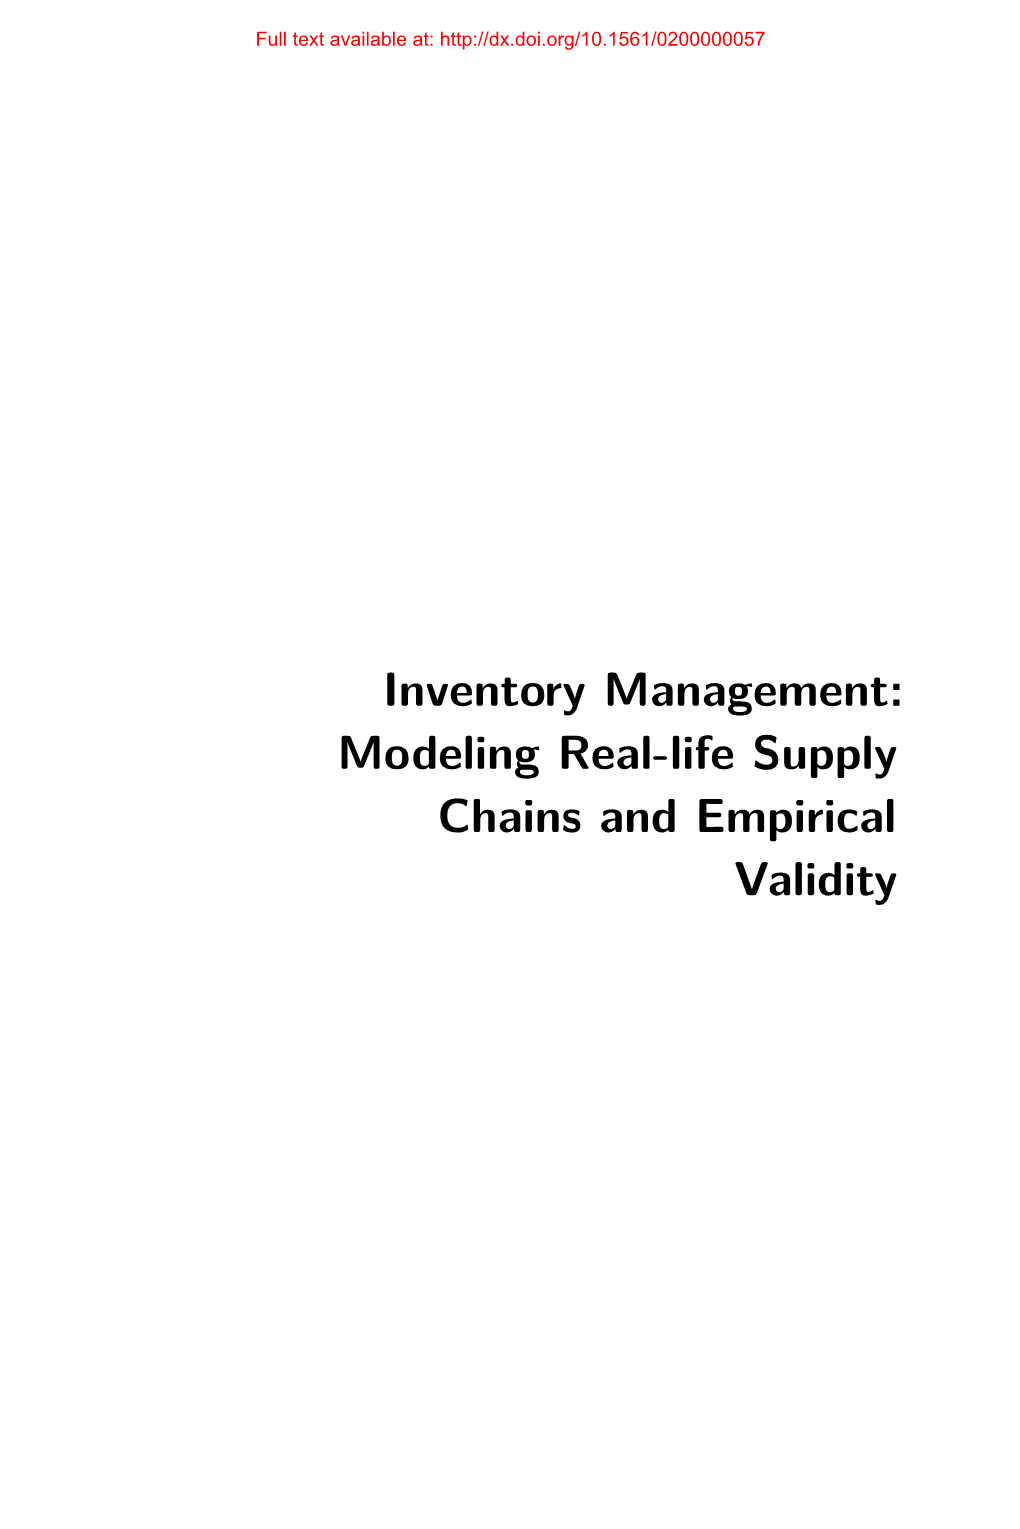 Inventory Management: Modeling Real-Life Supply Chains and Empirical Validity Full Text Available At